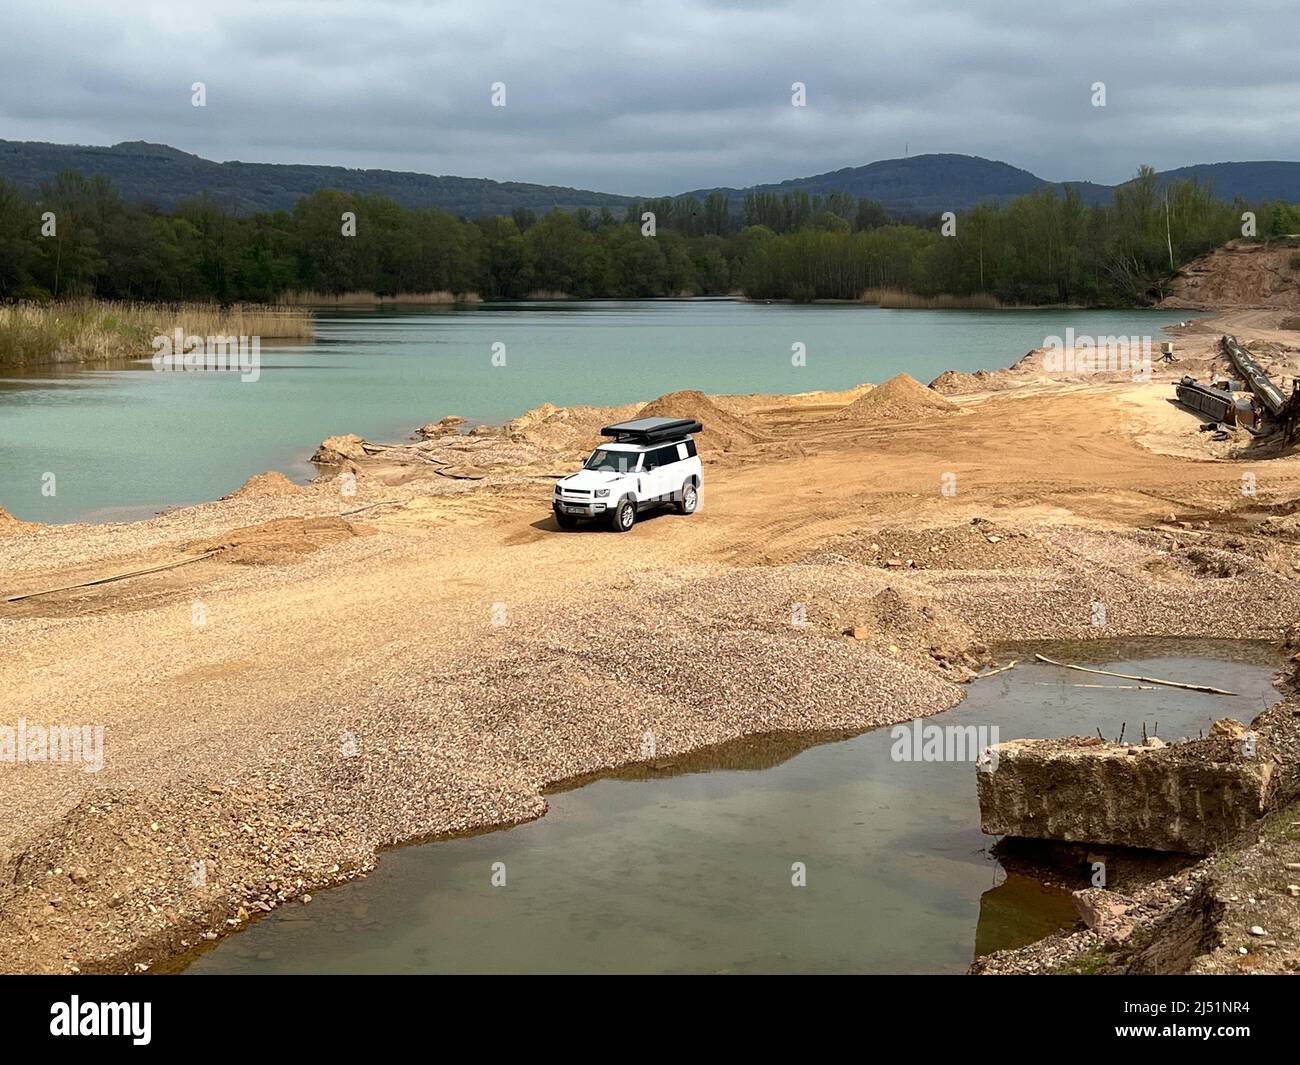 4x4 Offroad vehicle (SUV) at a lake side in the mountains Stock Photo